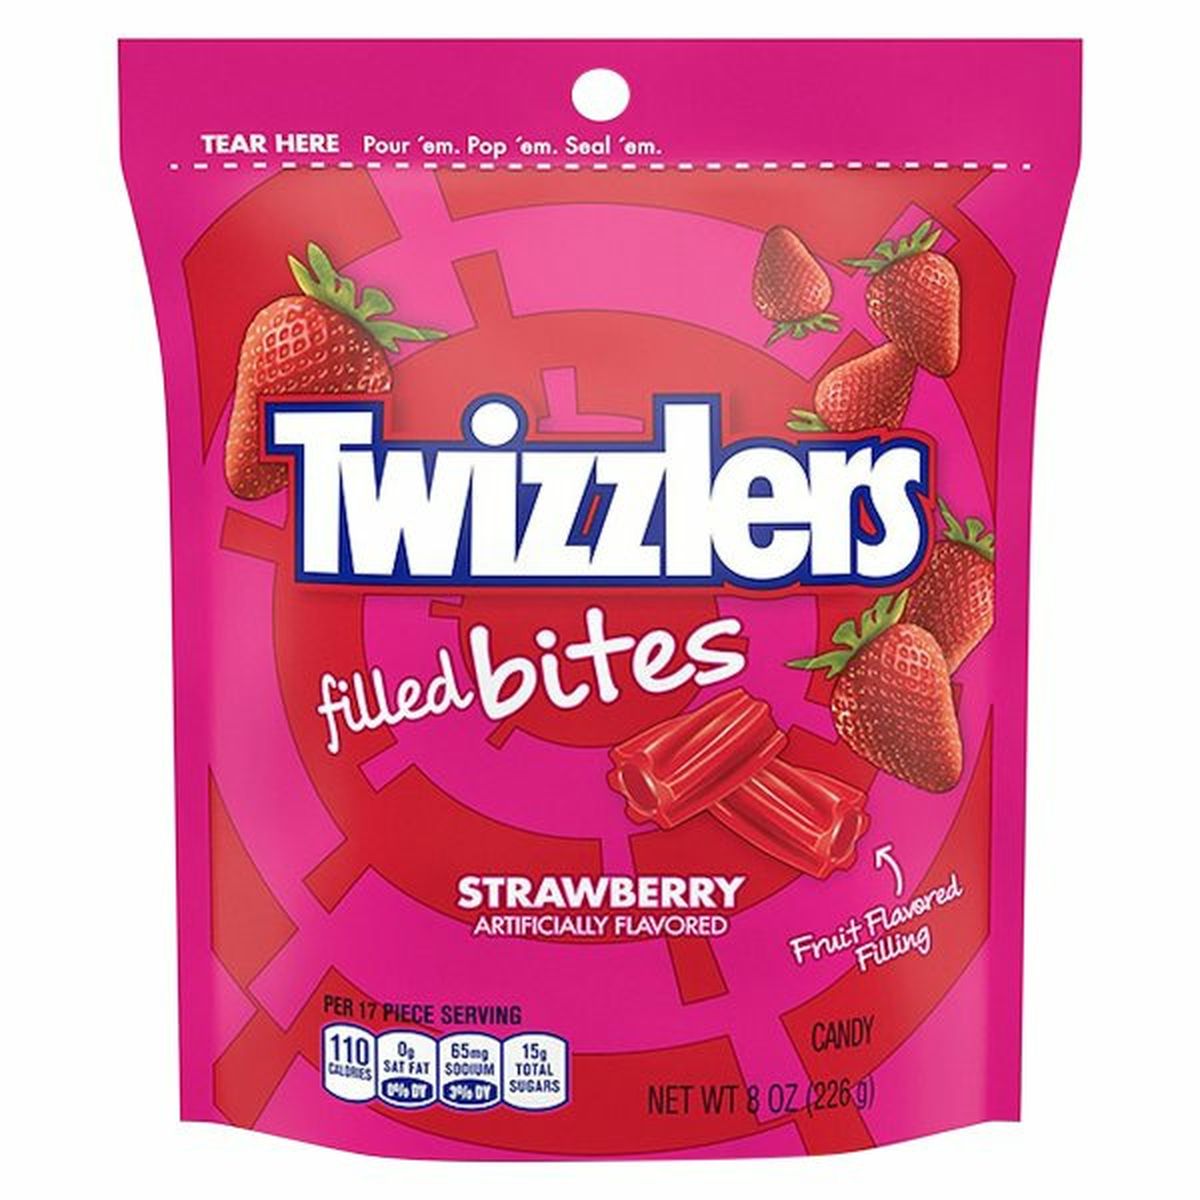 Calories in Twizzlers Candy, Filled Bites, Strawberry